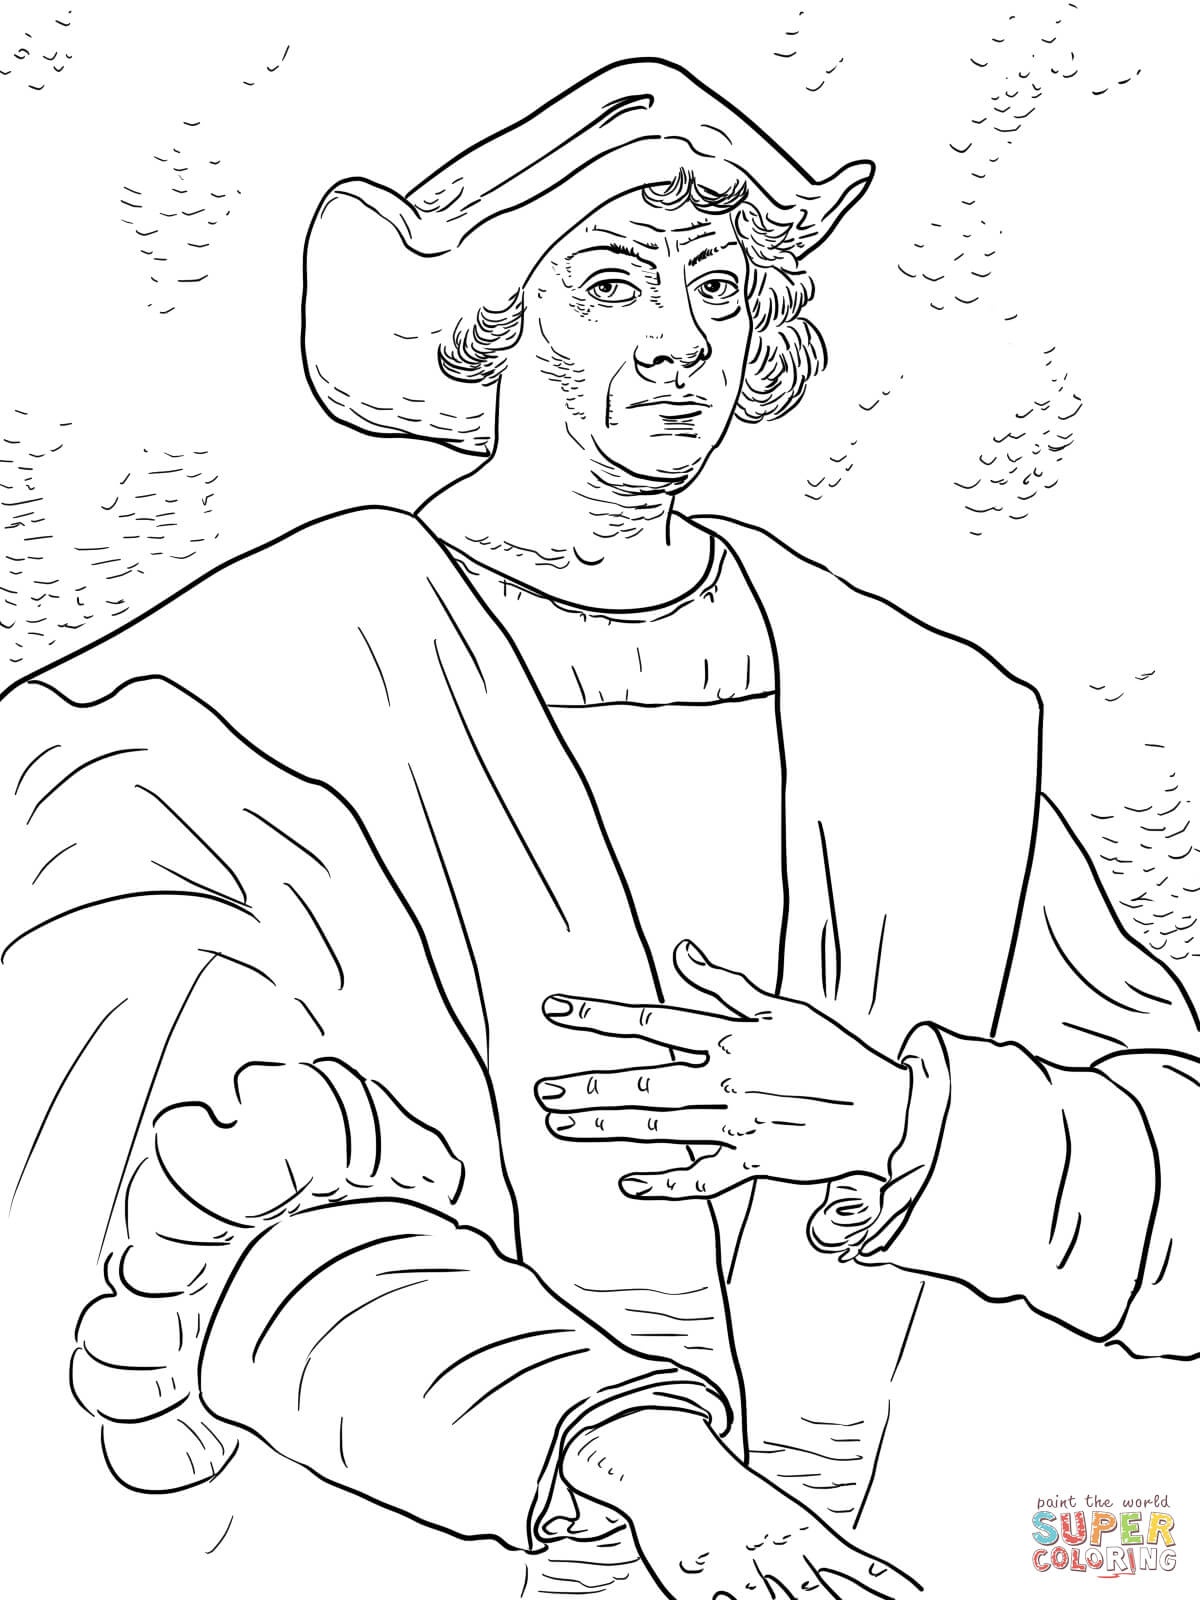 Christopher Columbus Coloring Page | Free Printable Coloring Pages - Free Printable Christopher Columbus Coloring Pages